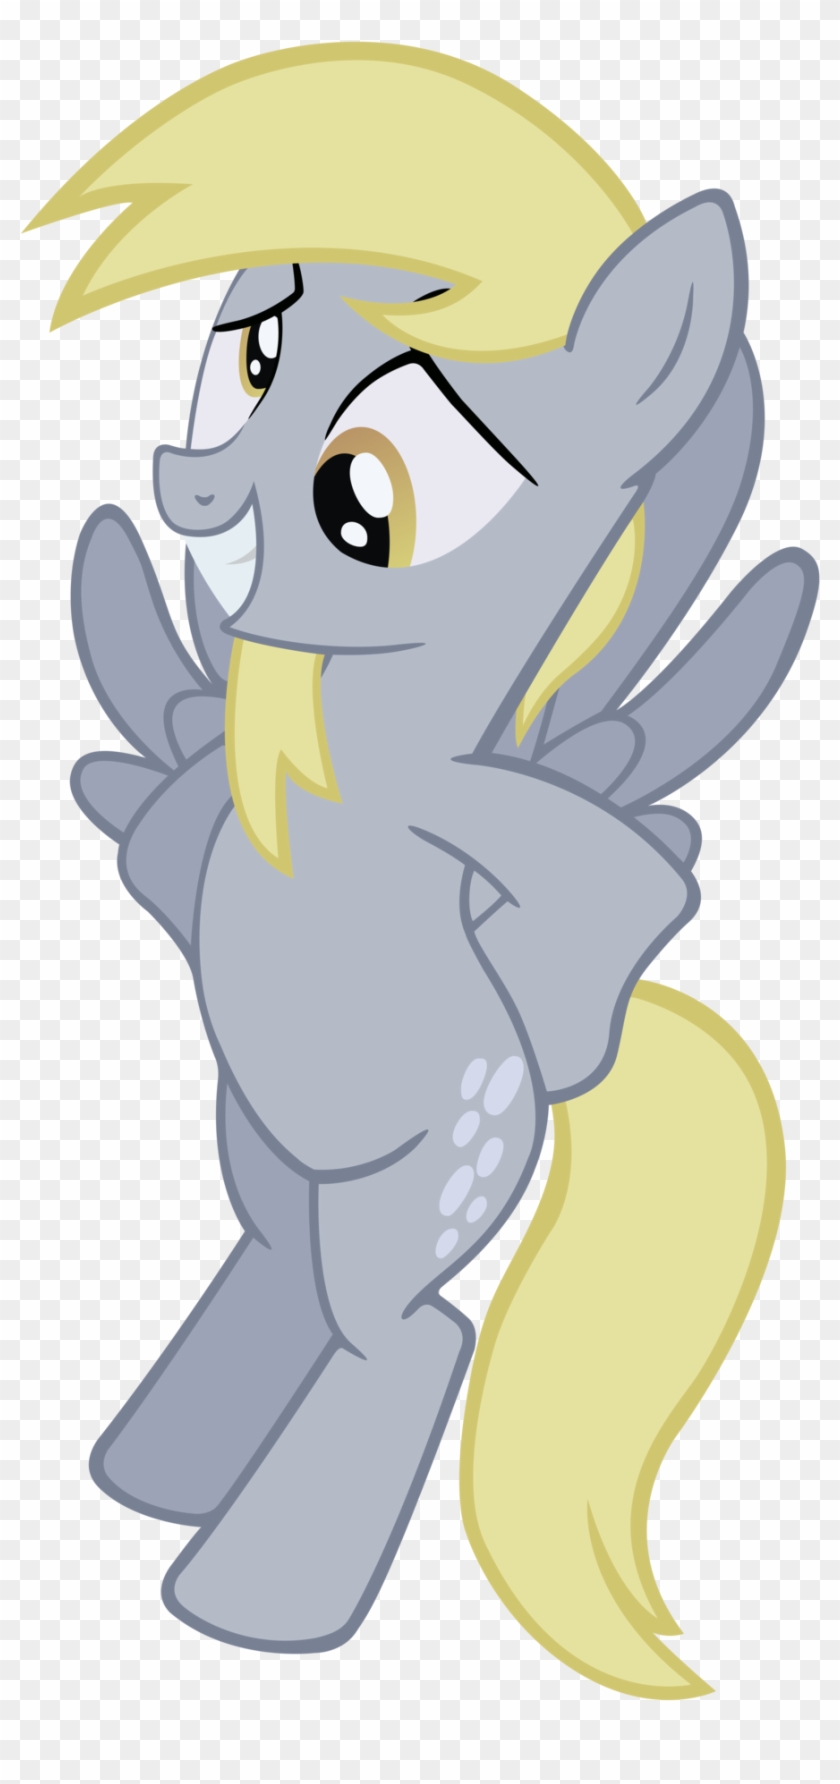 Derpy Hooves Vector By Tootootaloo Derpy Hooves Vector - Mlp Derpy Hooves Vector #1187759